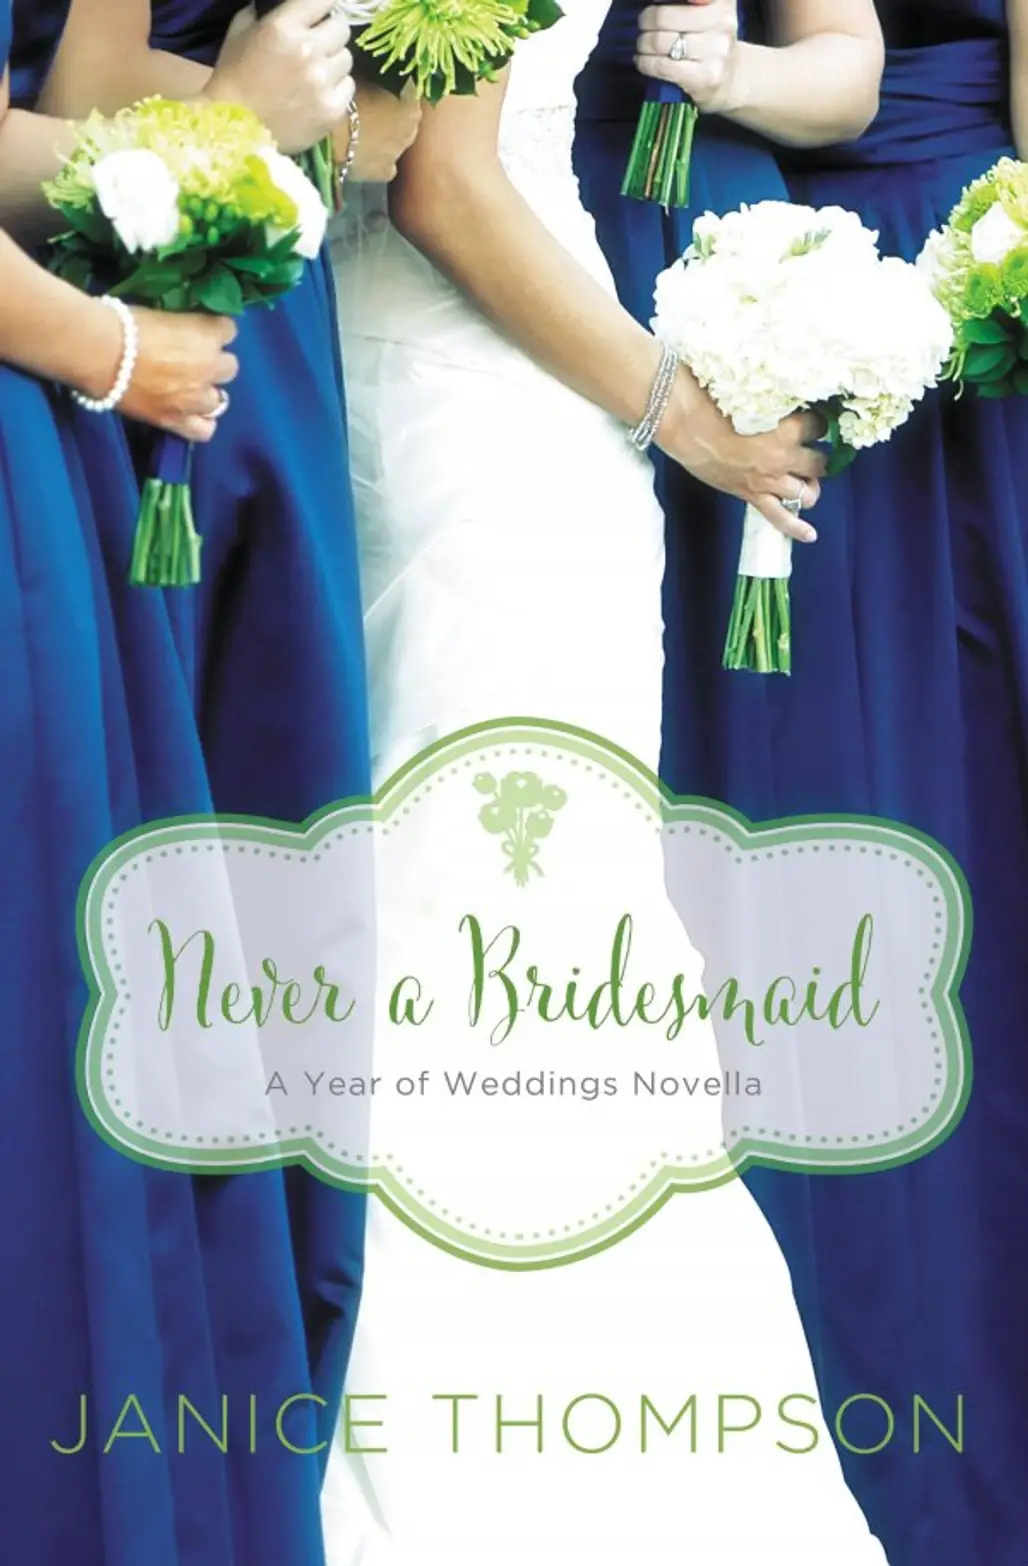 Never a Bridesmaid by Janice Thompson